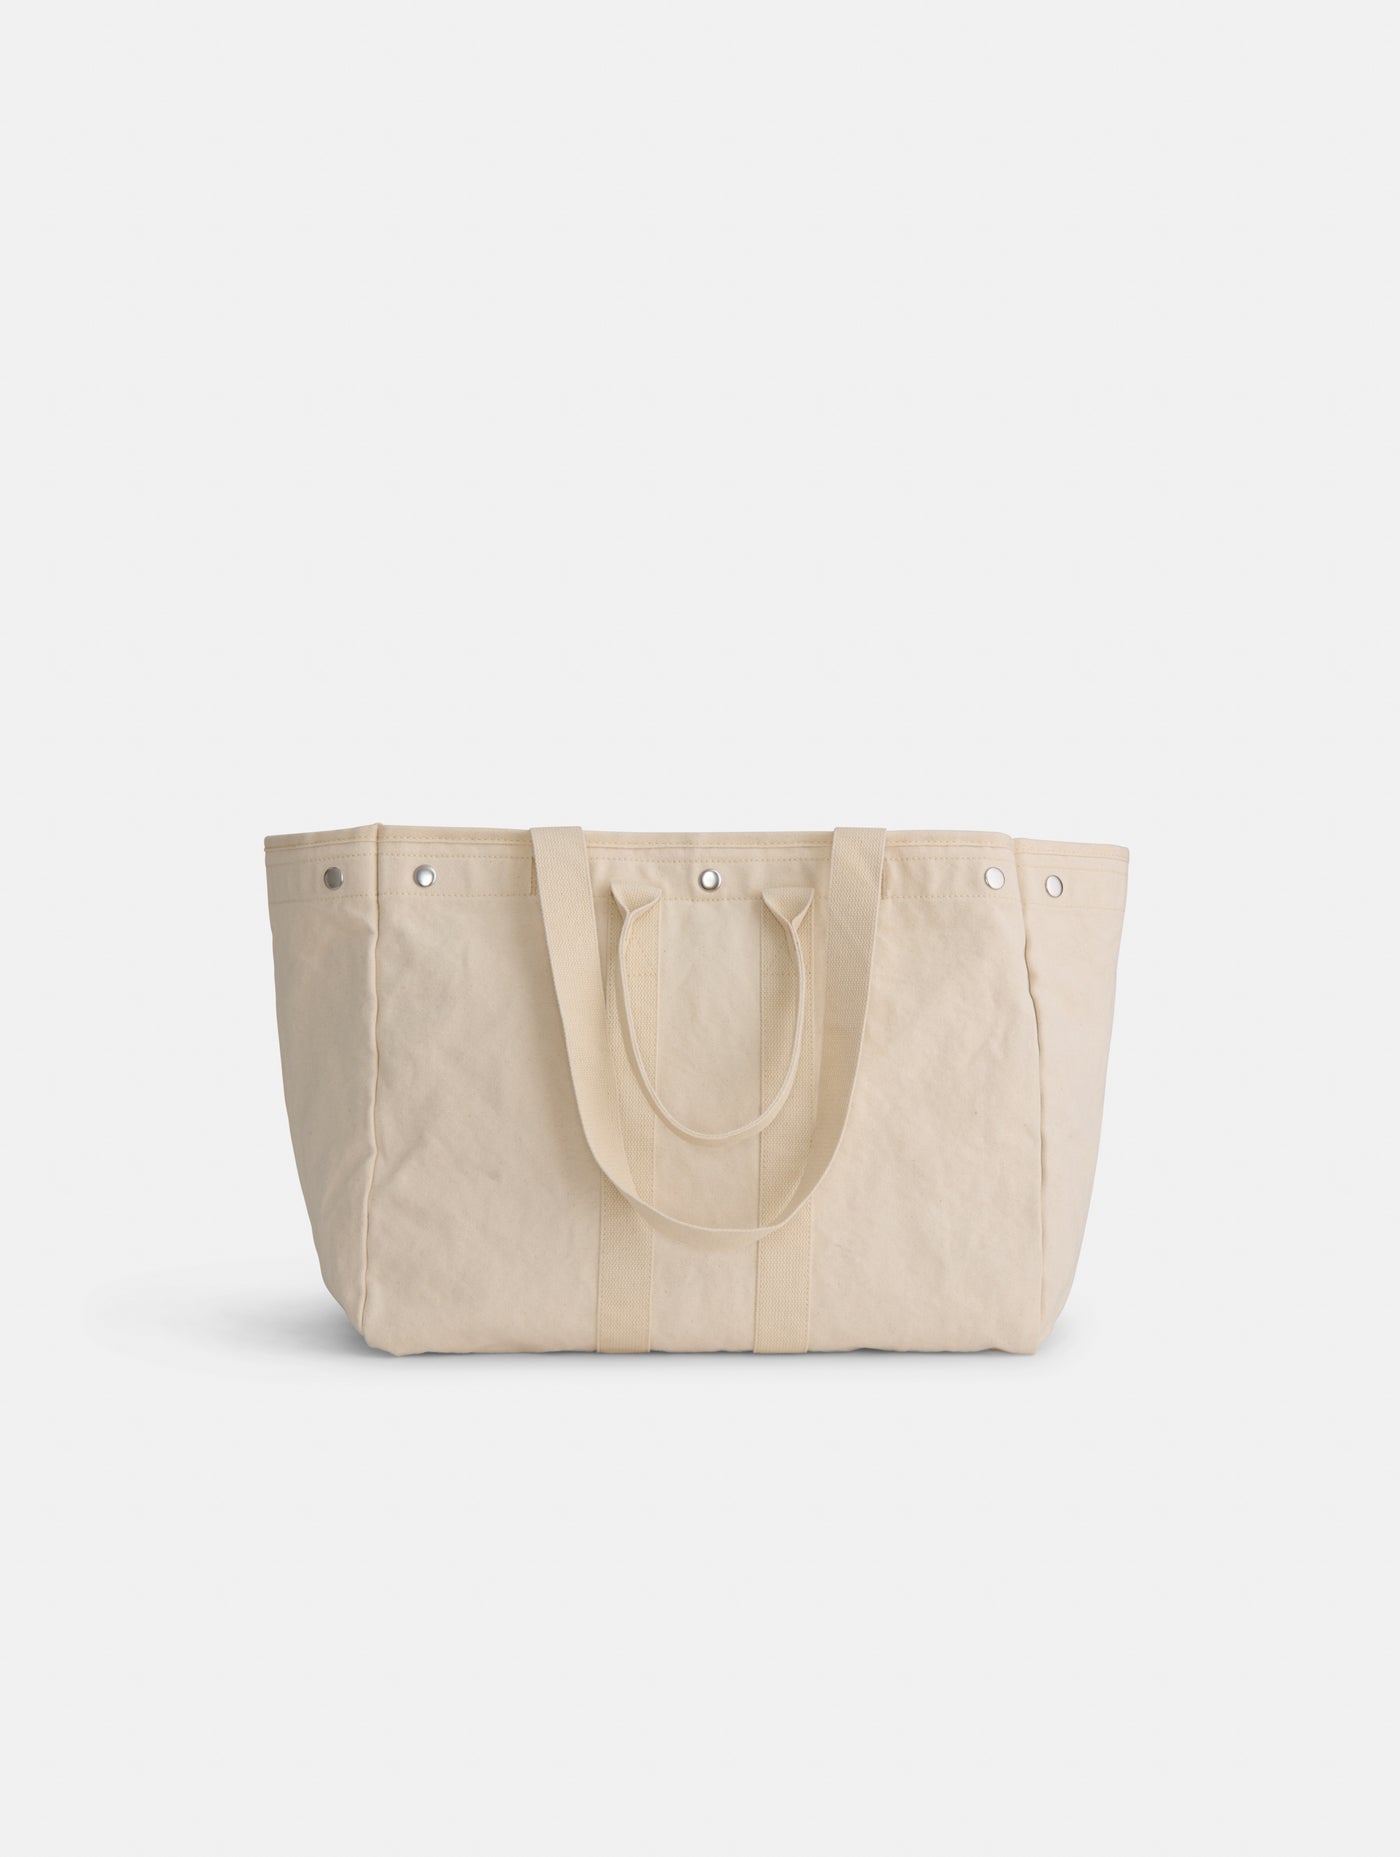 Save Khaki Men's Canvas Tote Bag in Navy | END. Clothing